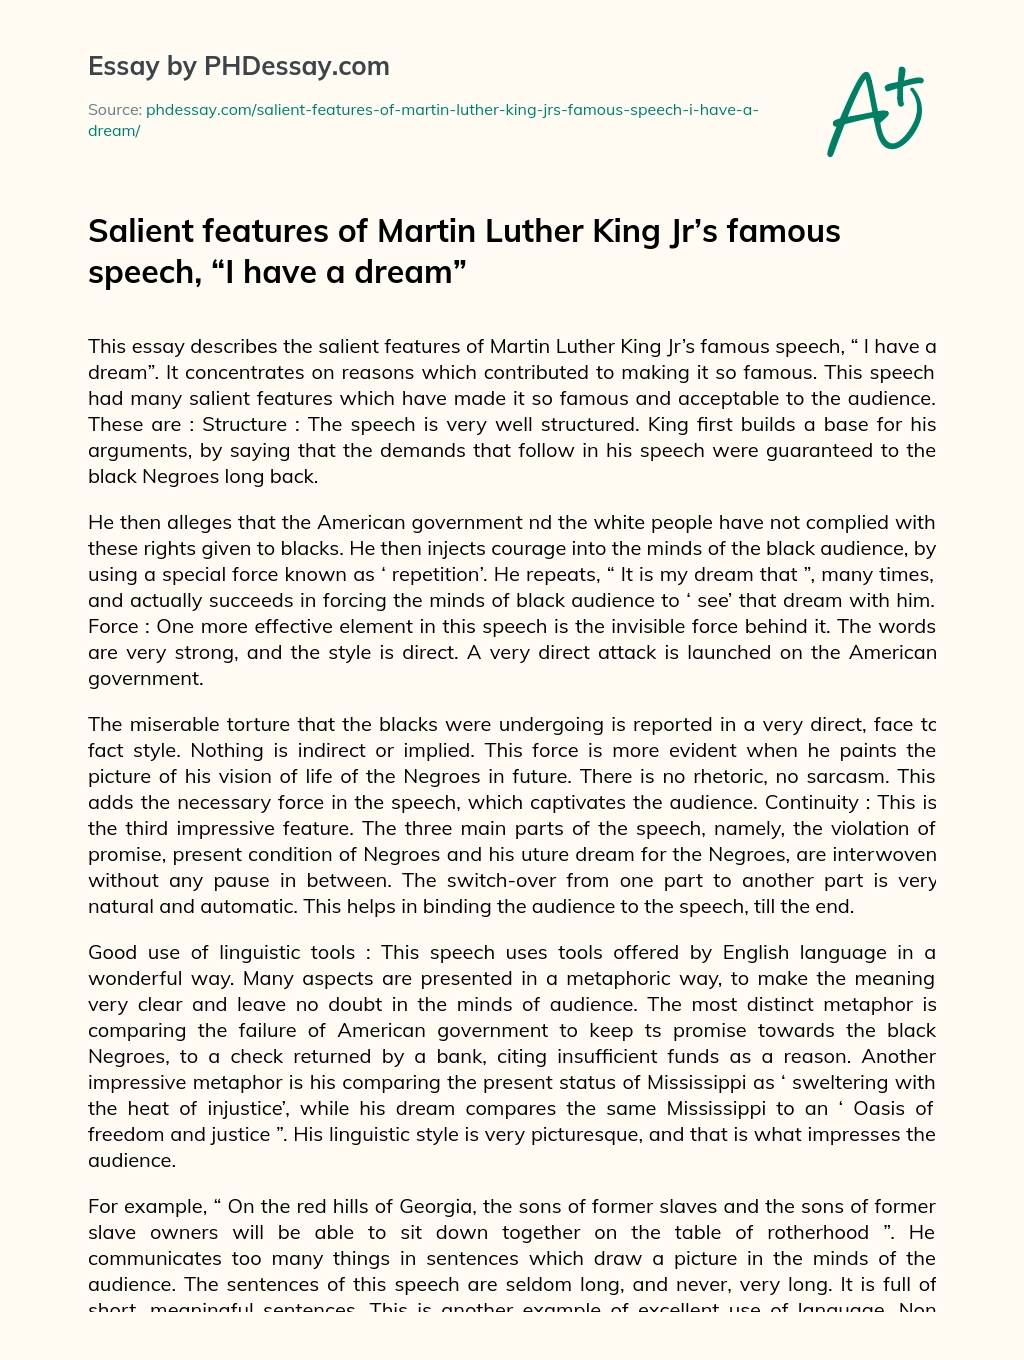 essays by martin luther king